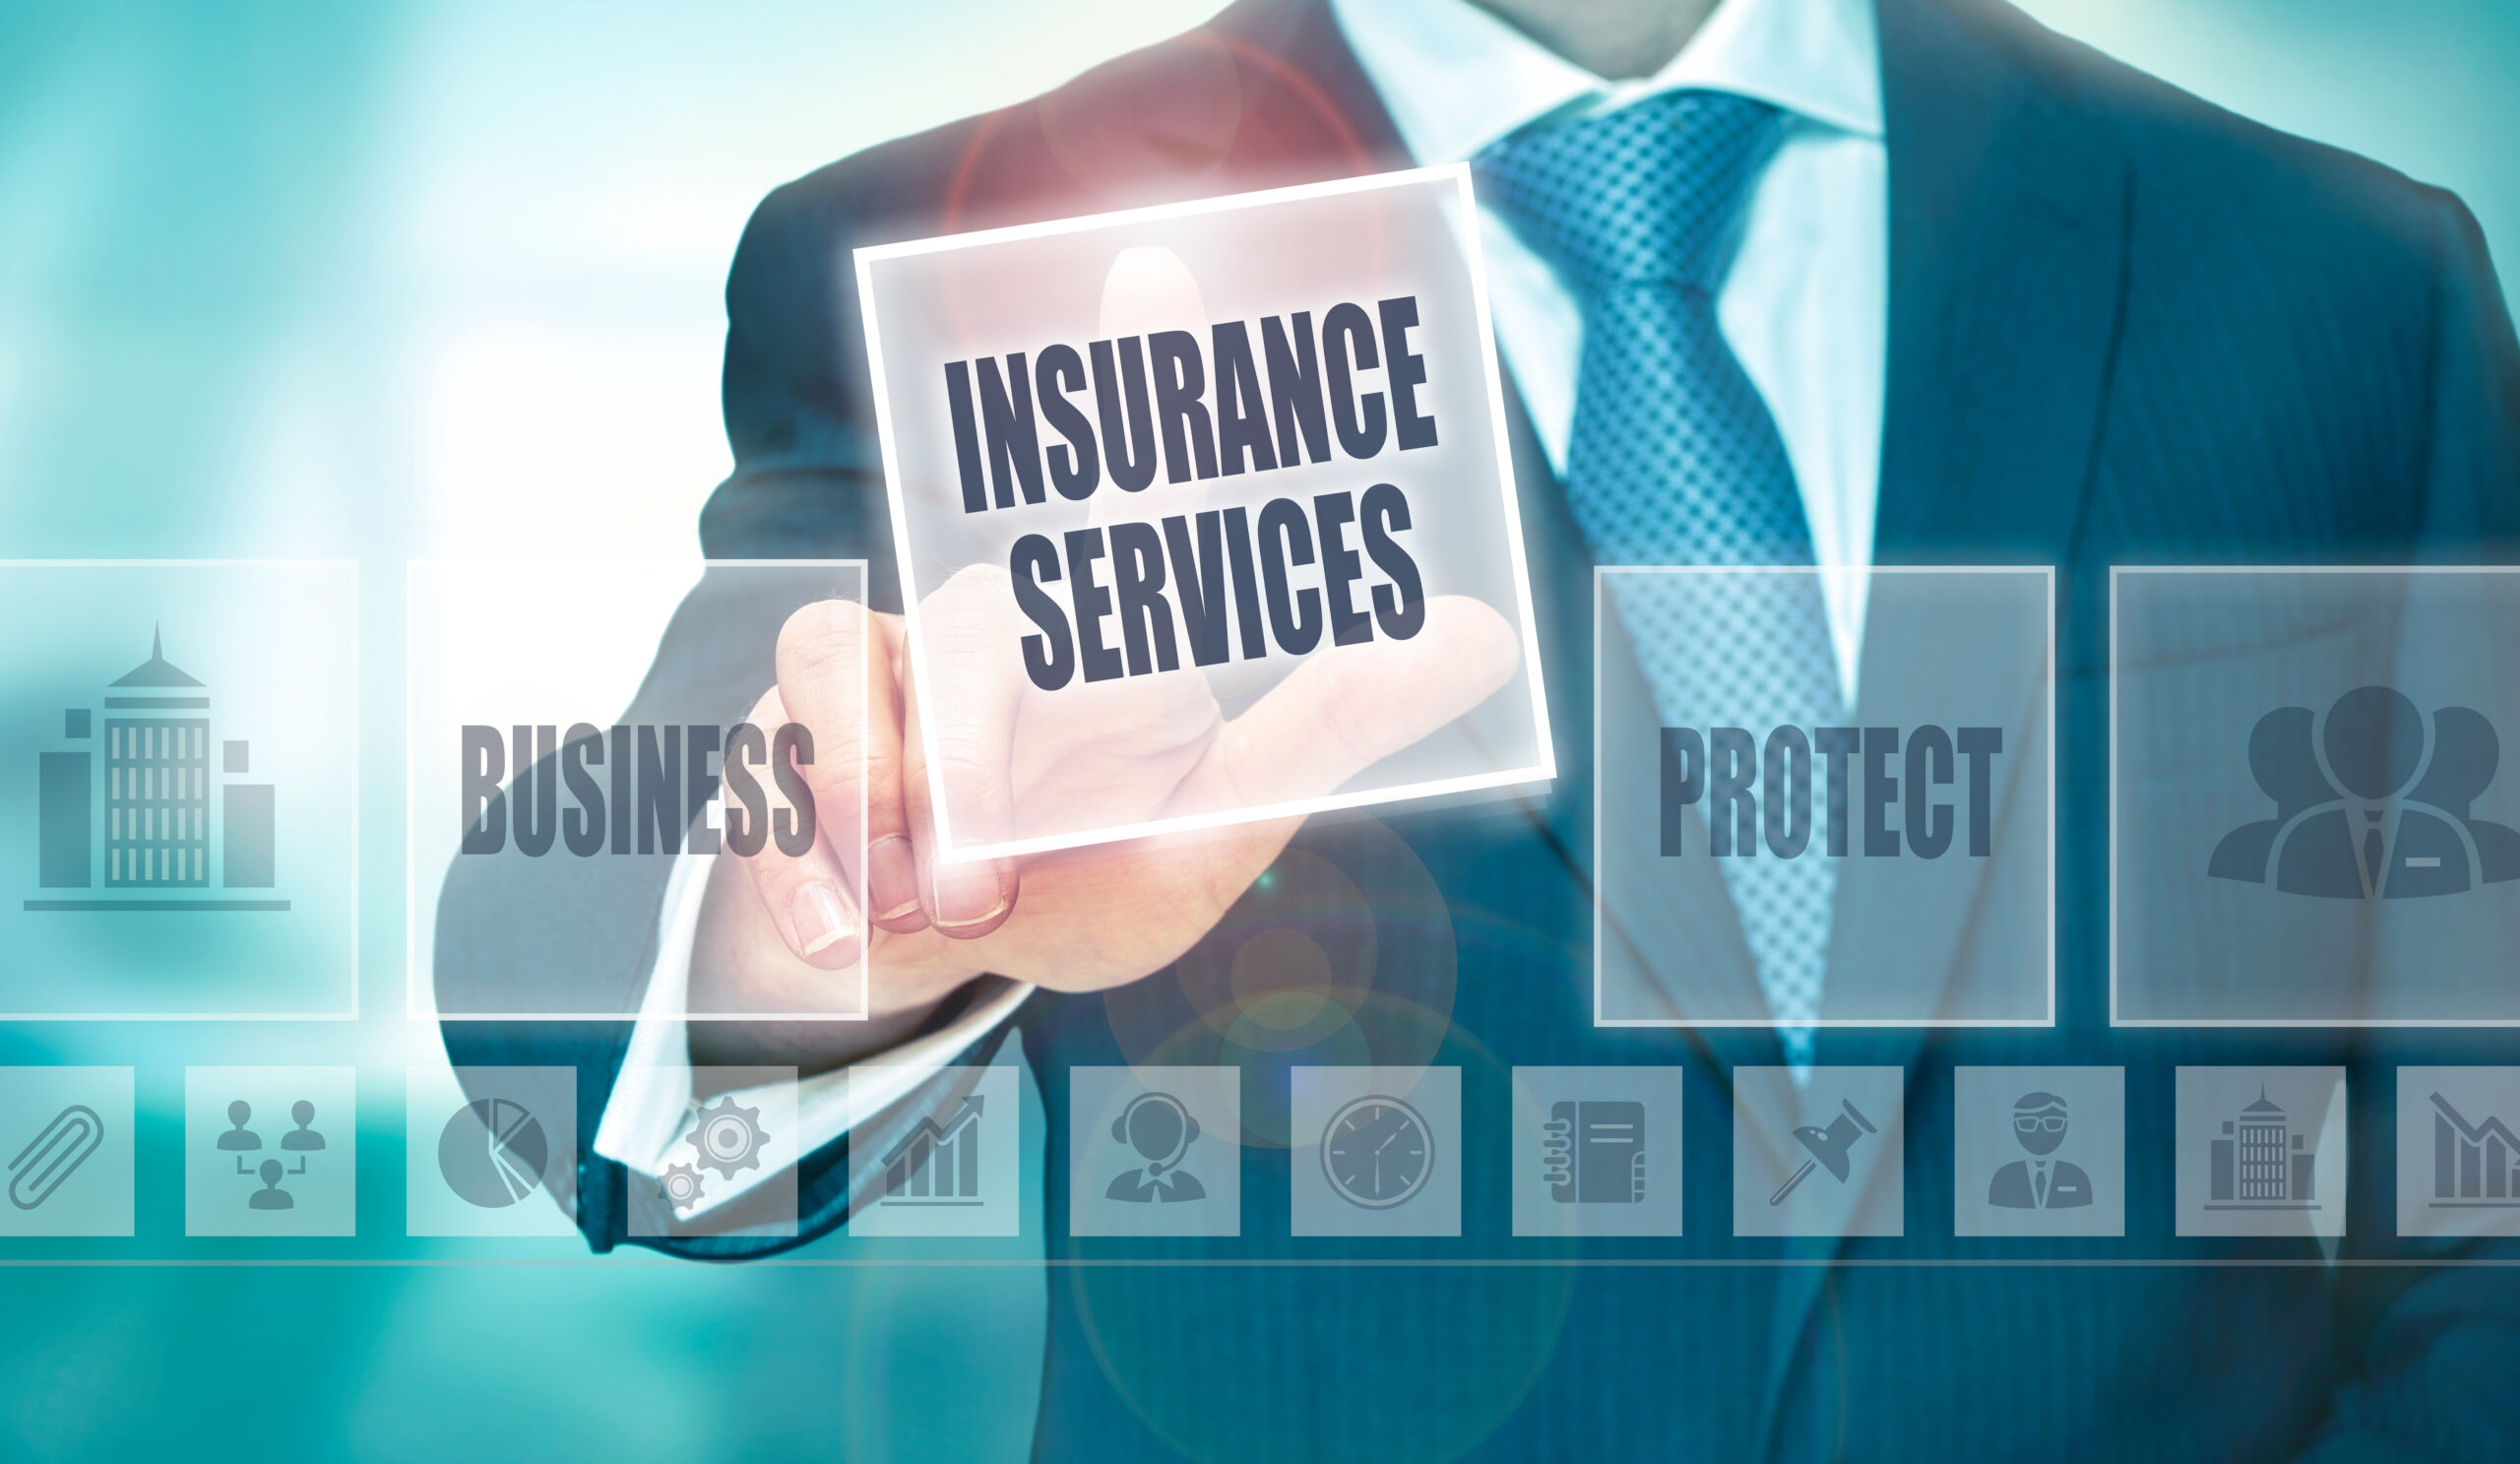 Dealing with business insurance claims